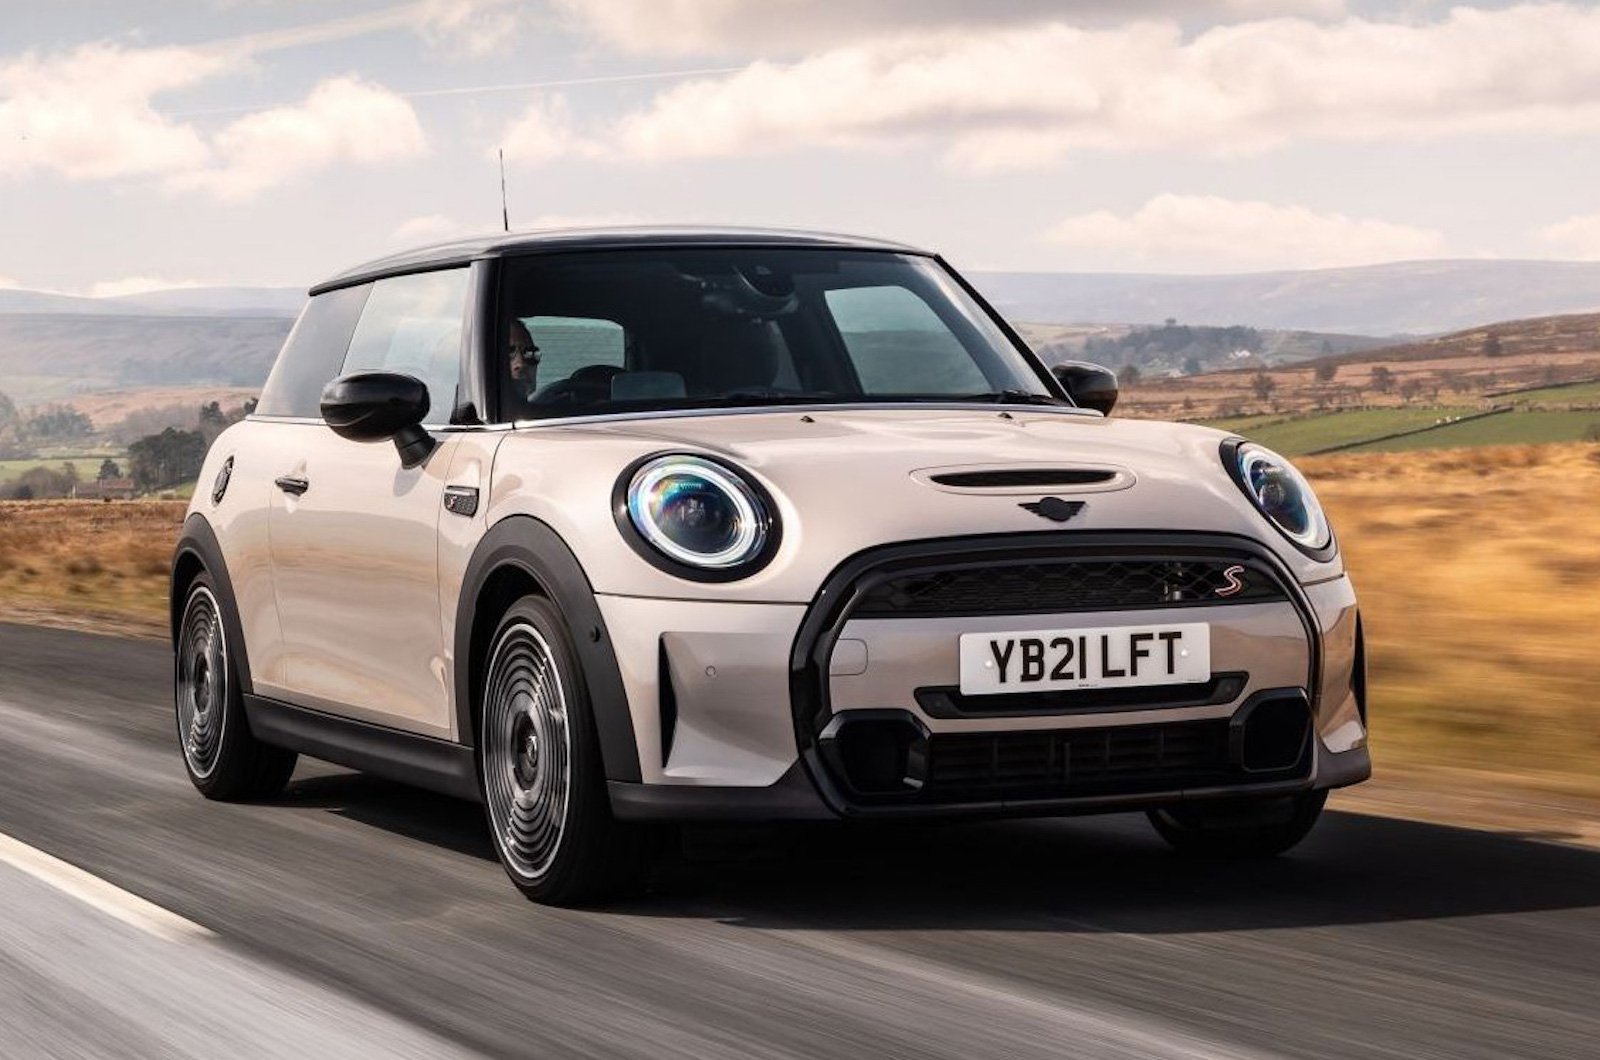 <p><strong>Model</strong> Hatch | <strong>Version </strong>1.5 Cooper Classic Premium 3dr | <strong>Target PCP</strong> £271 per month | <strong>Target Price</strong> £21,911 | <strong>The deal</strong> Four years' PCP finance with 6.9% APR. Limit of 8000 miles per year | <strong>Star rating</strong> 3</p>  <p>The Mini successfully fills a premium void in the small car class, and that's largely thanks to its high-quality interior and brilliant infotainment system. What's more, its fun to drive and this 1.5-litre petrol engine is pretty peppy, too. However, the ride is on the firm side and it's not particularly practical.</p>